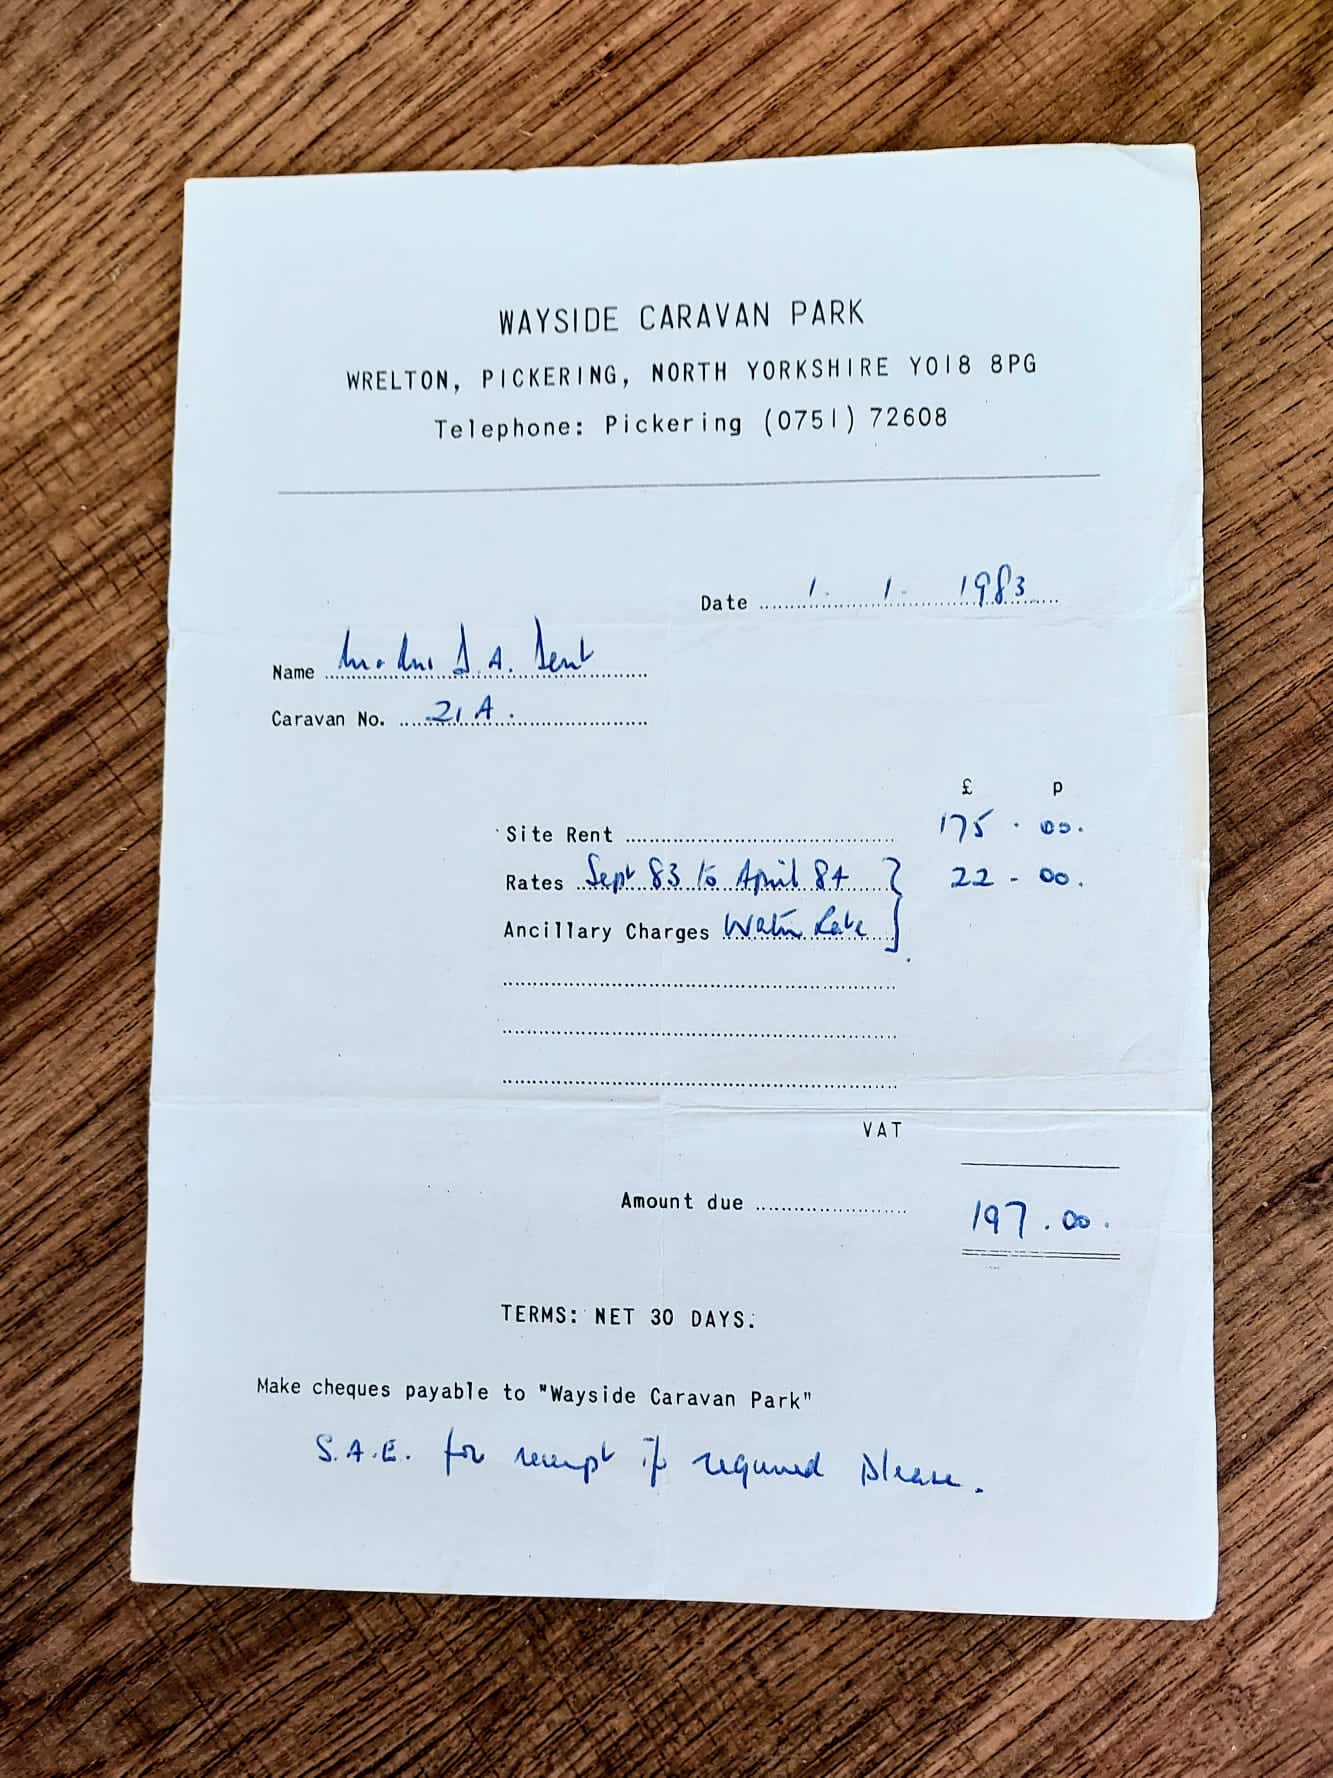 Mr and Mrs Dent's bill for their first caravan at Wayside